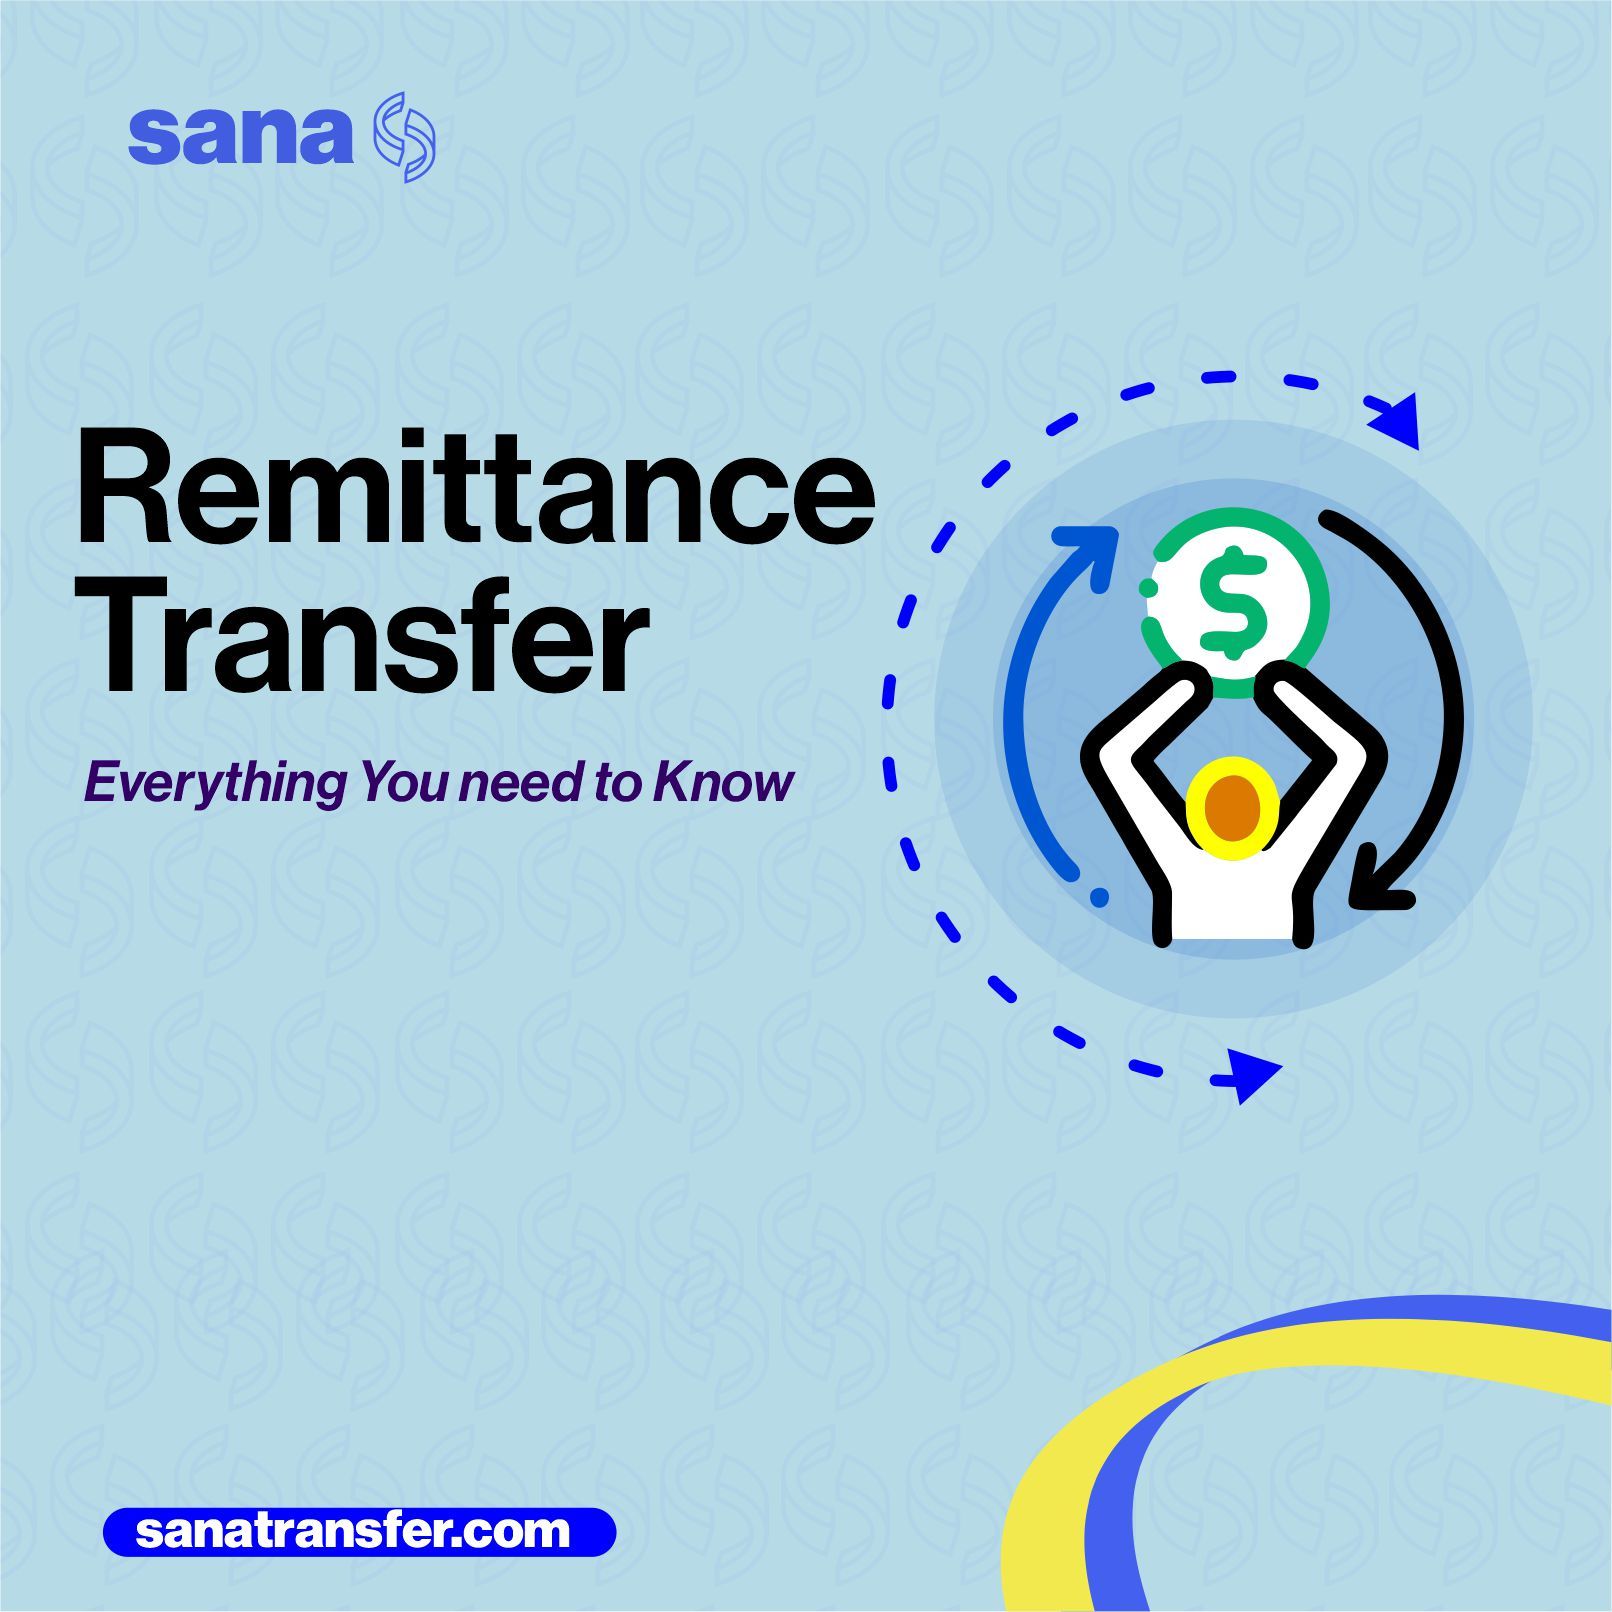 What is Remittance Transfer?